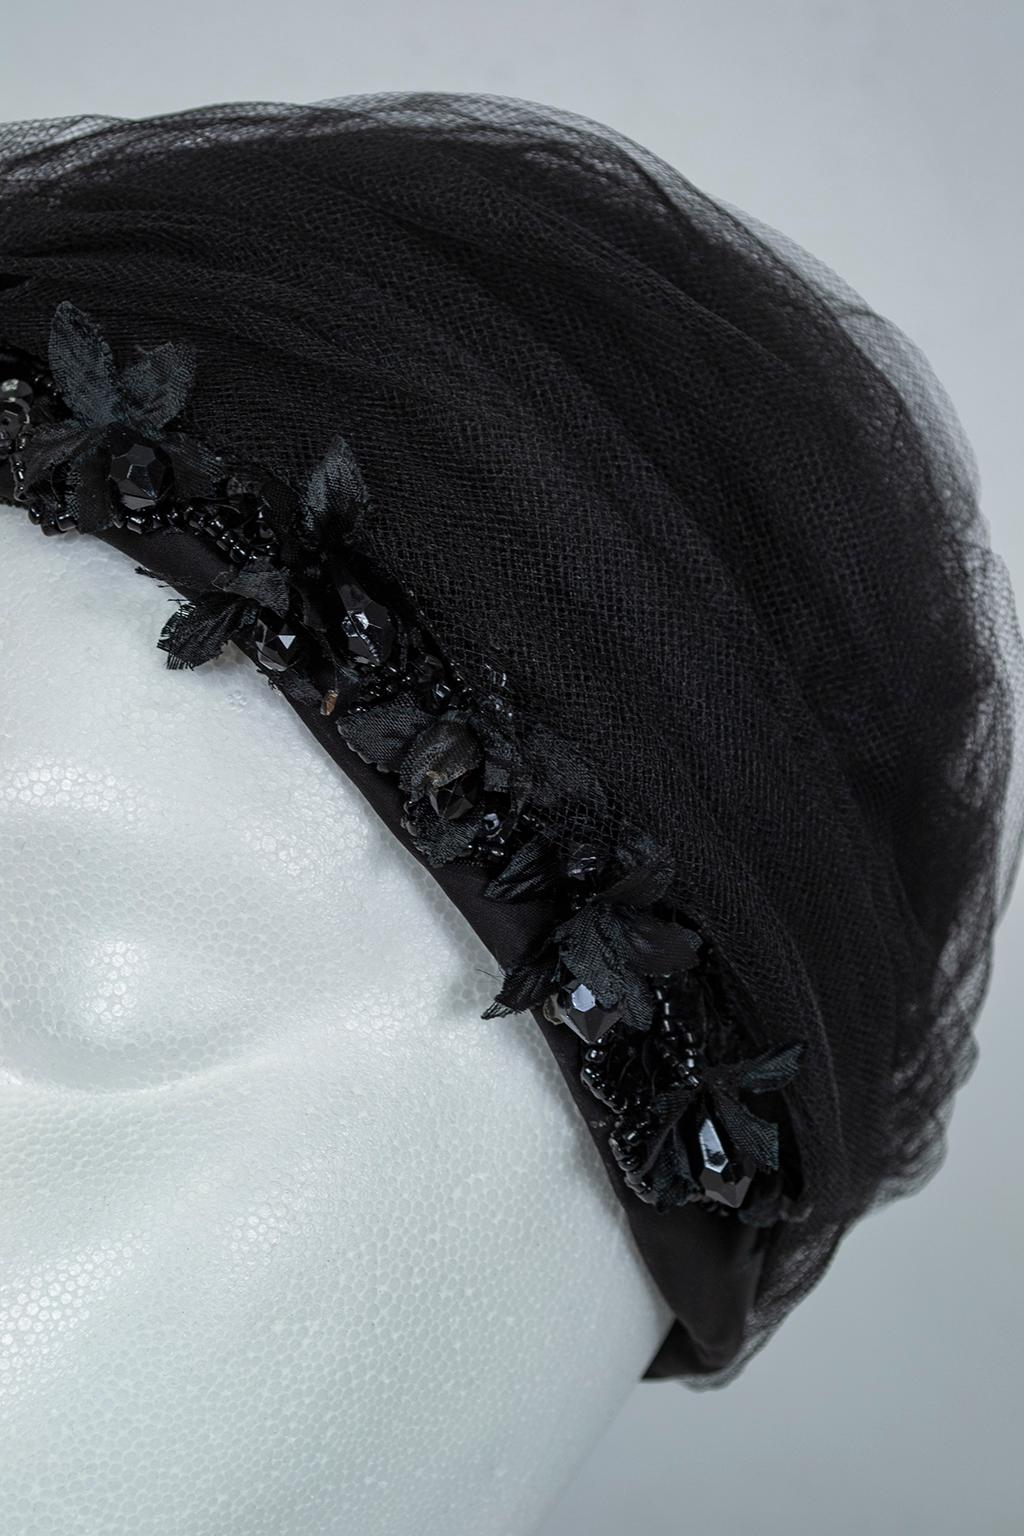 Women's Black Tulle Cocktail Turban Hat with Chandelier Bead Floral Trim - S, 1960s For Sale